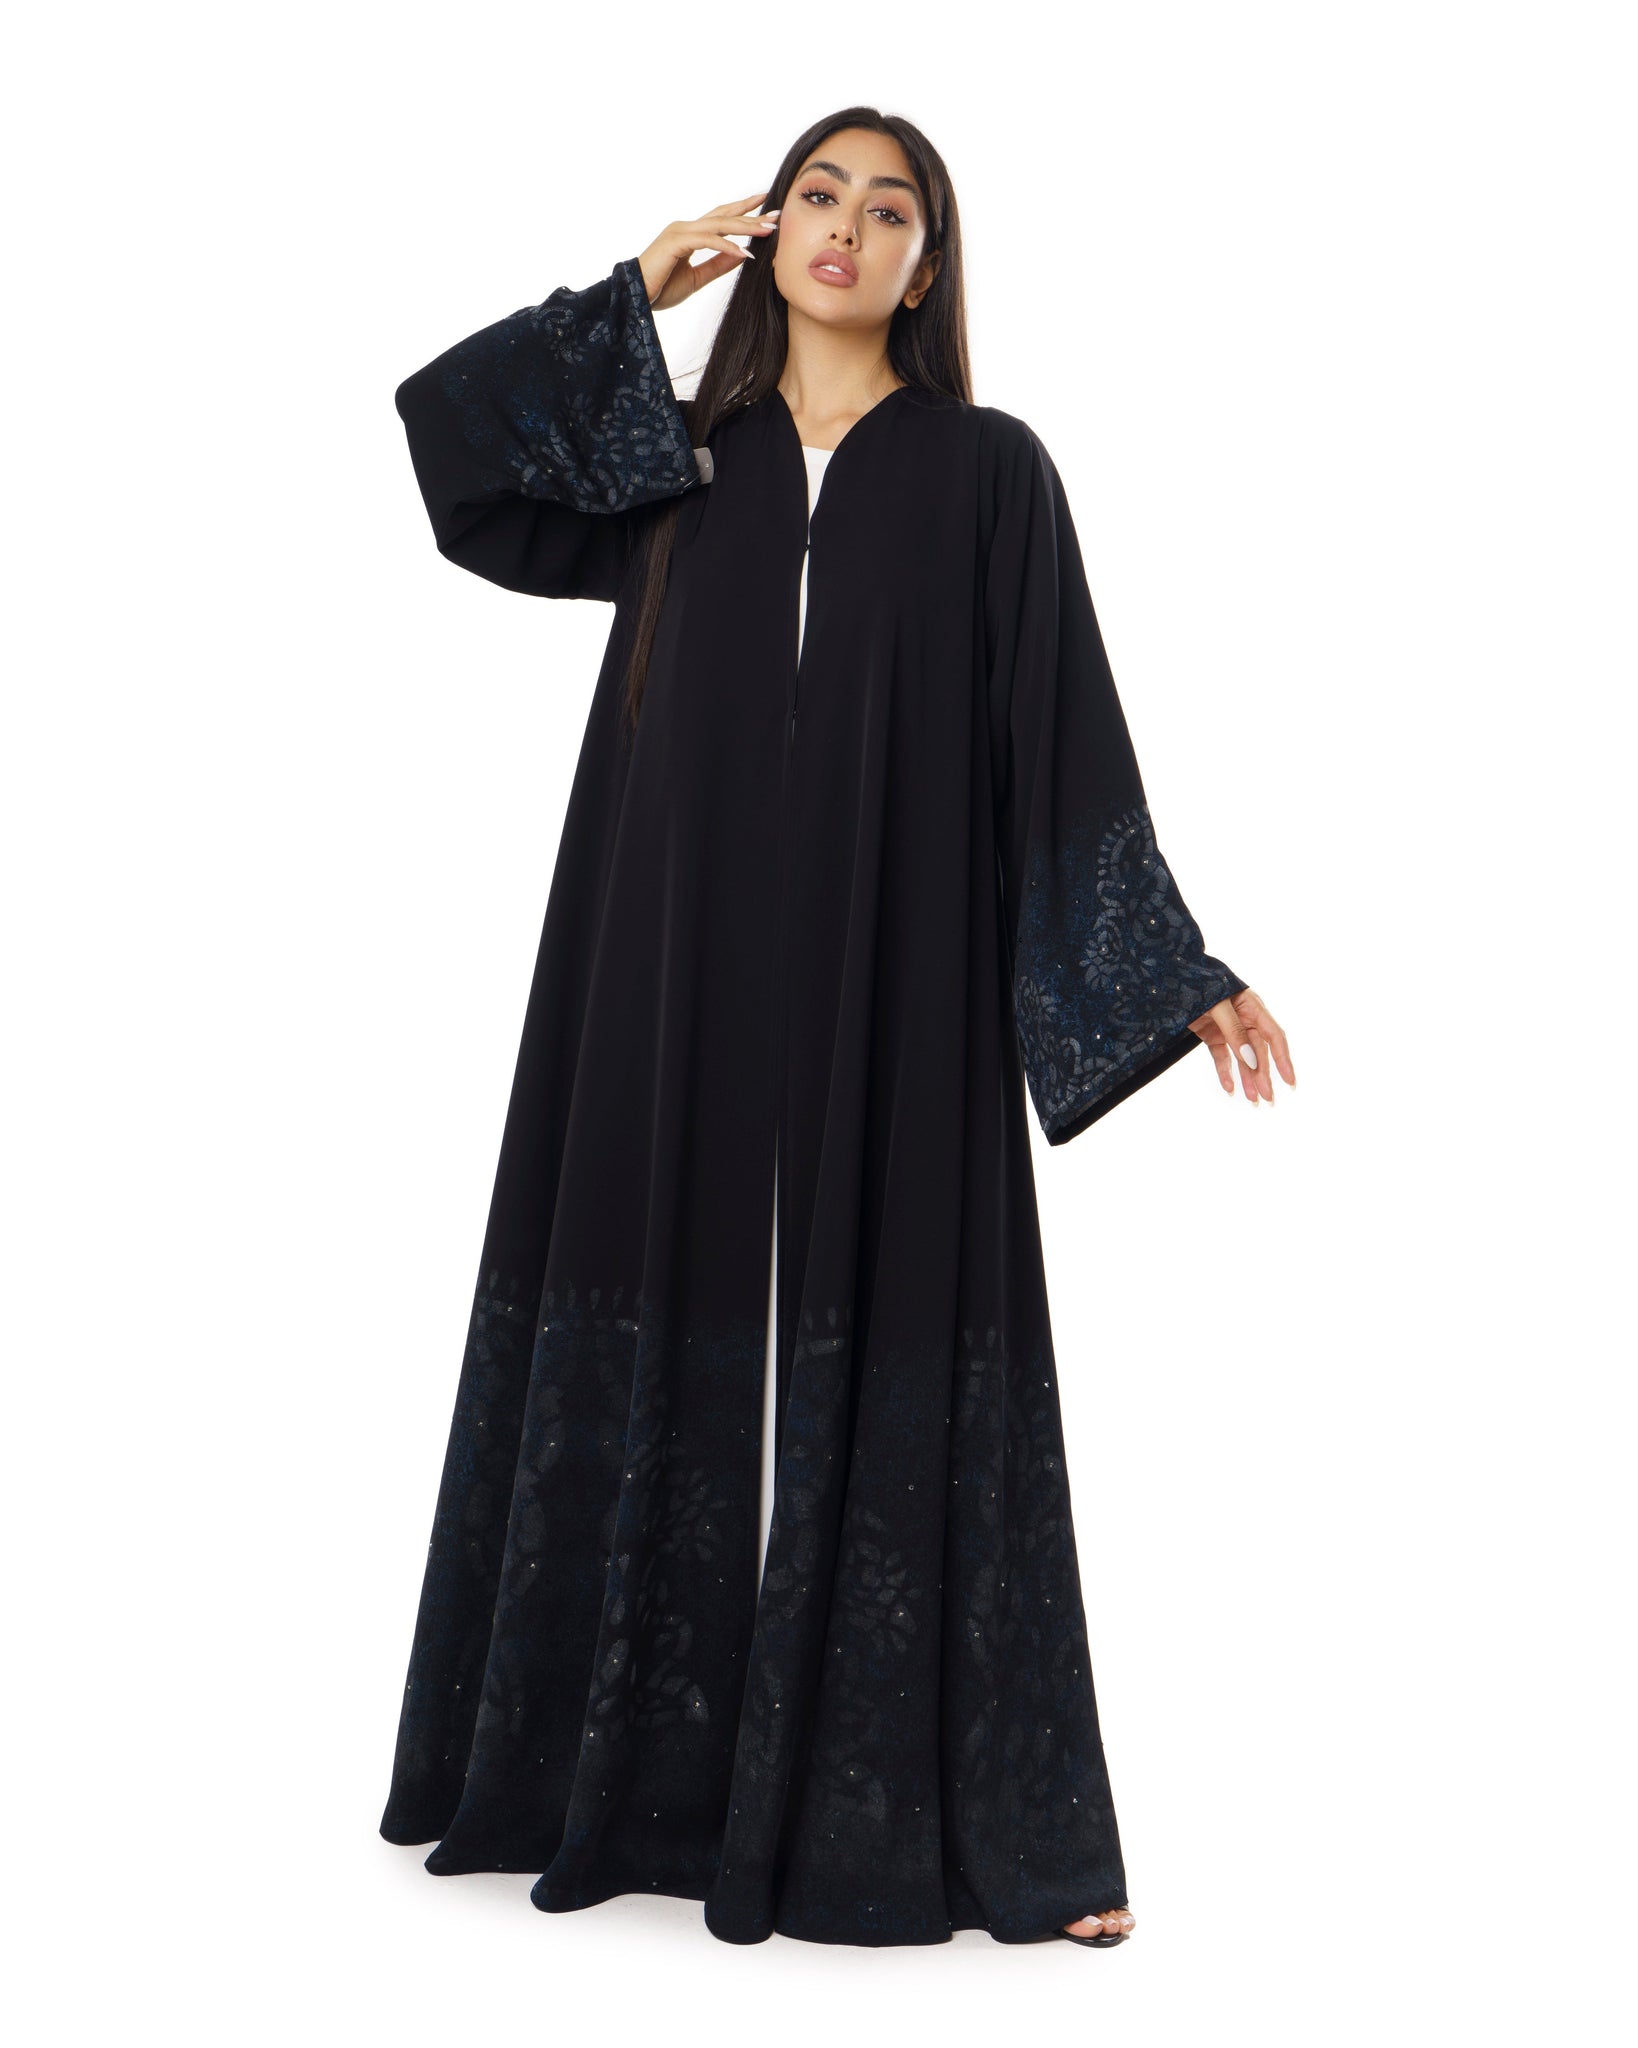 Hanayen Special Hand-Painted Abaya With Crystals